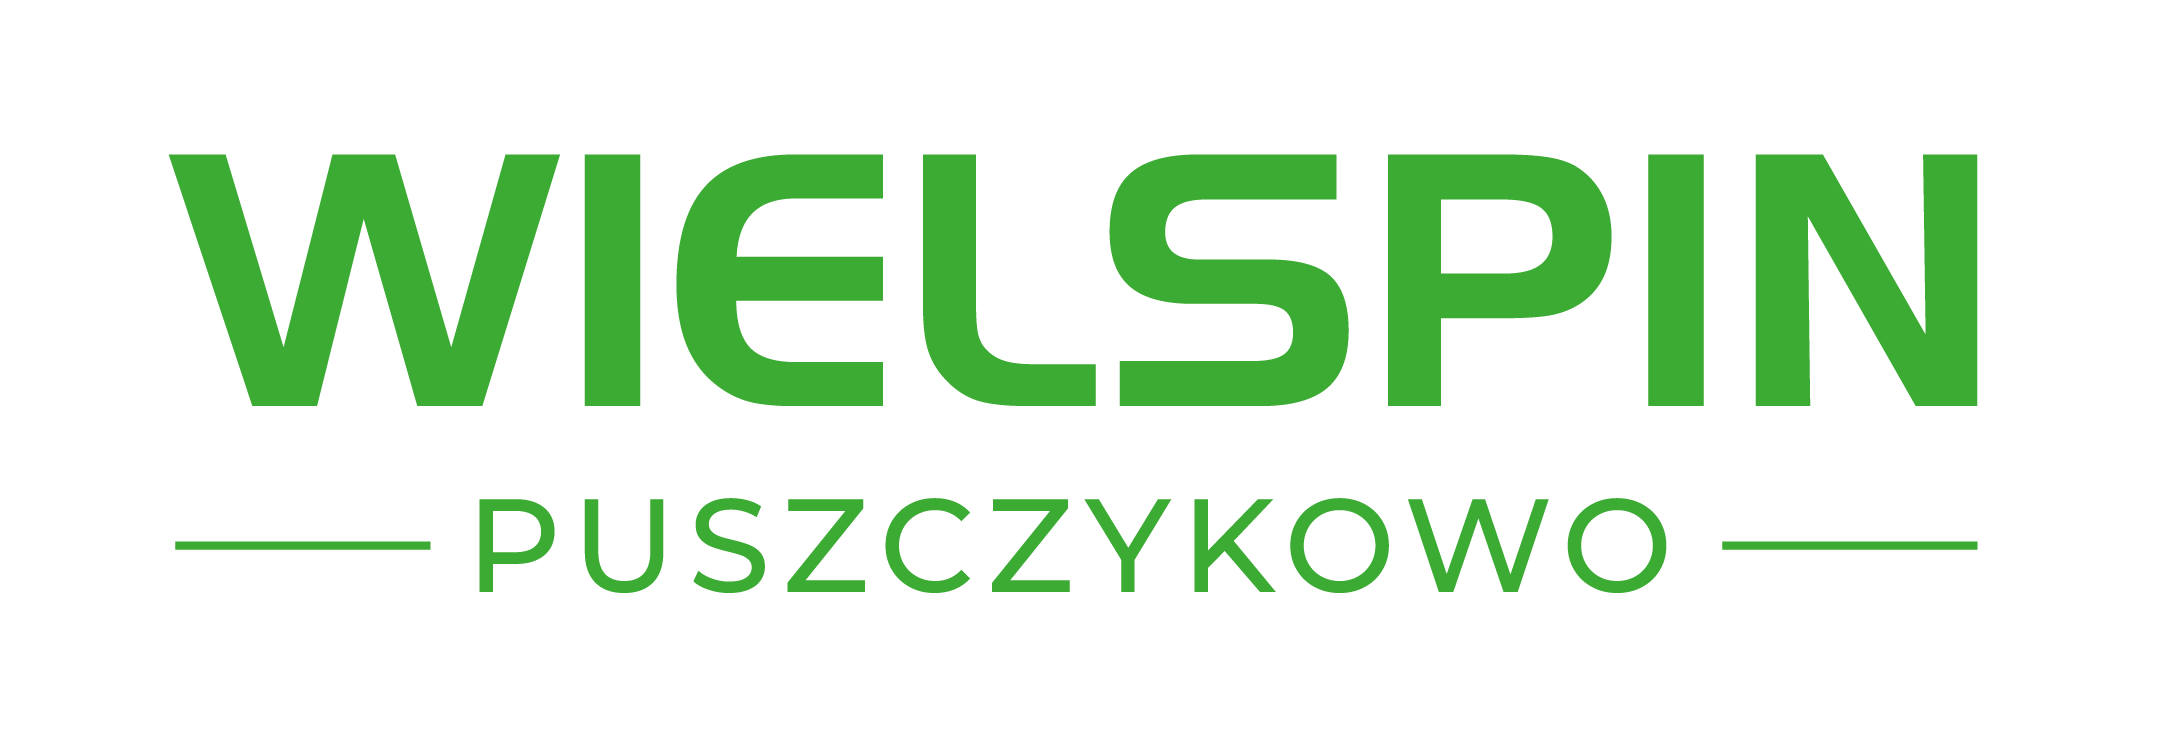 wielspin_puszczykowo_logo_new.png